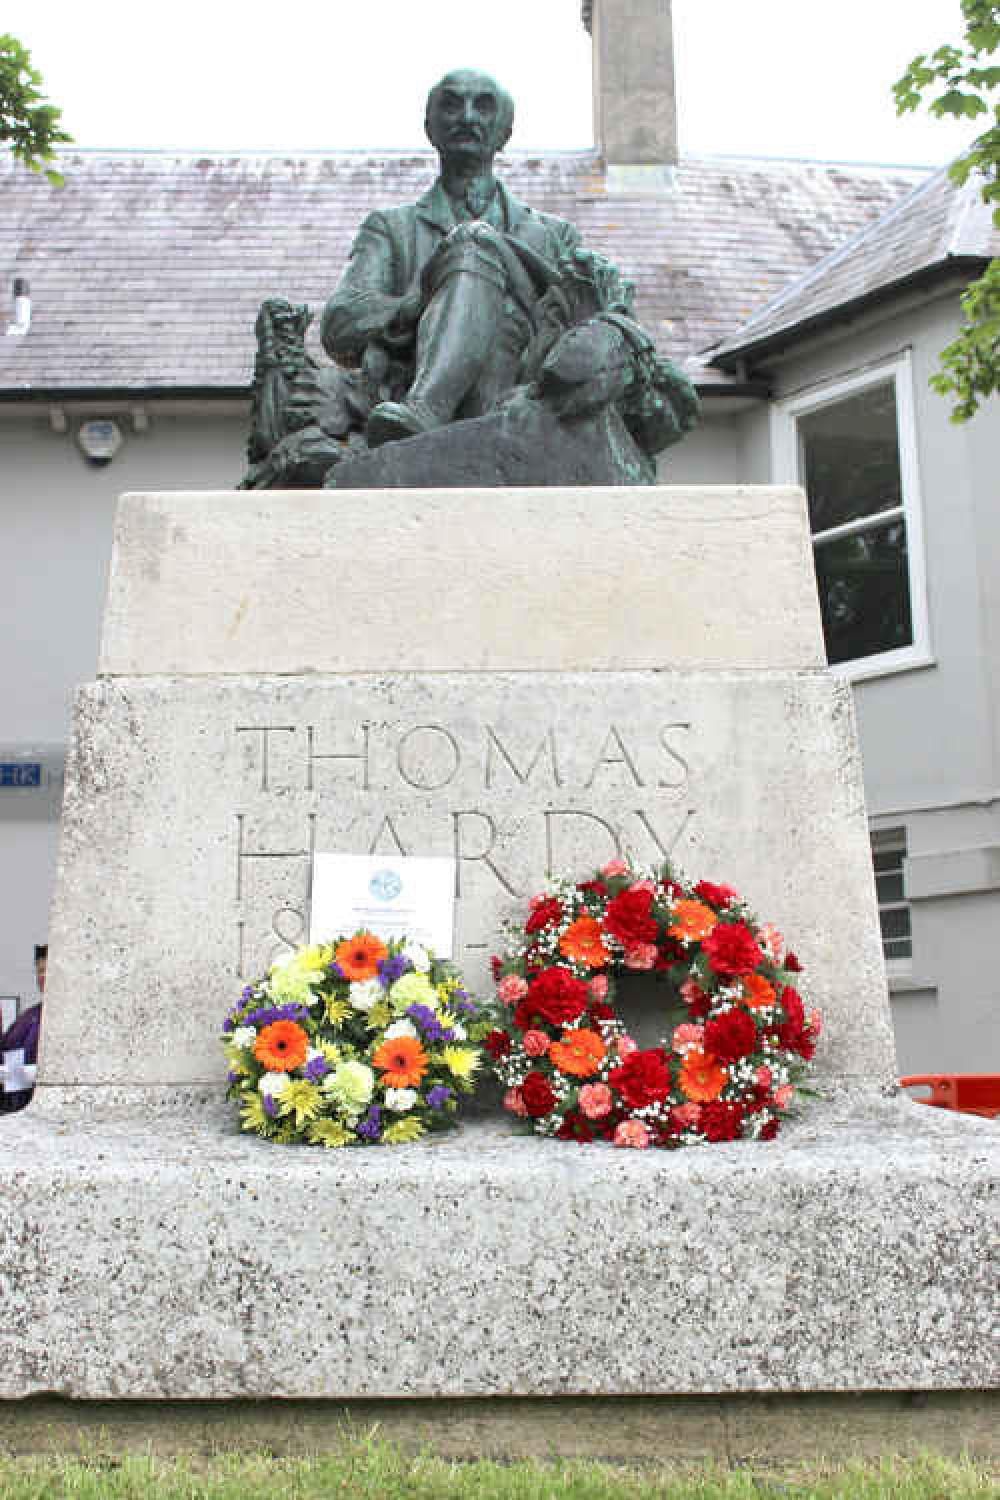 The Thomas Hardy statue with wreaths